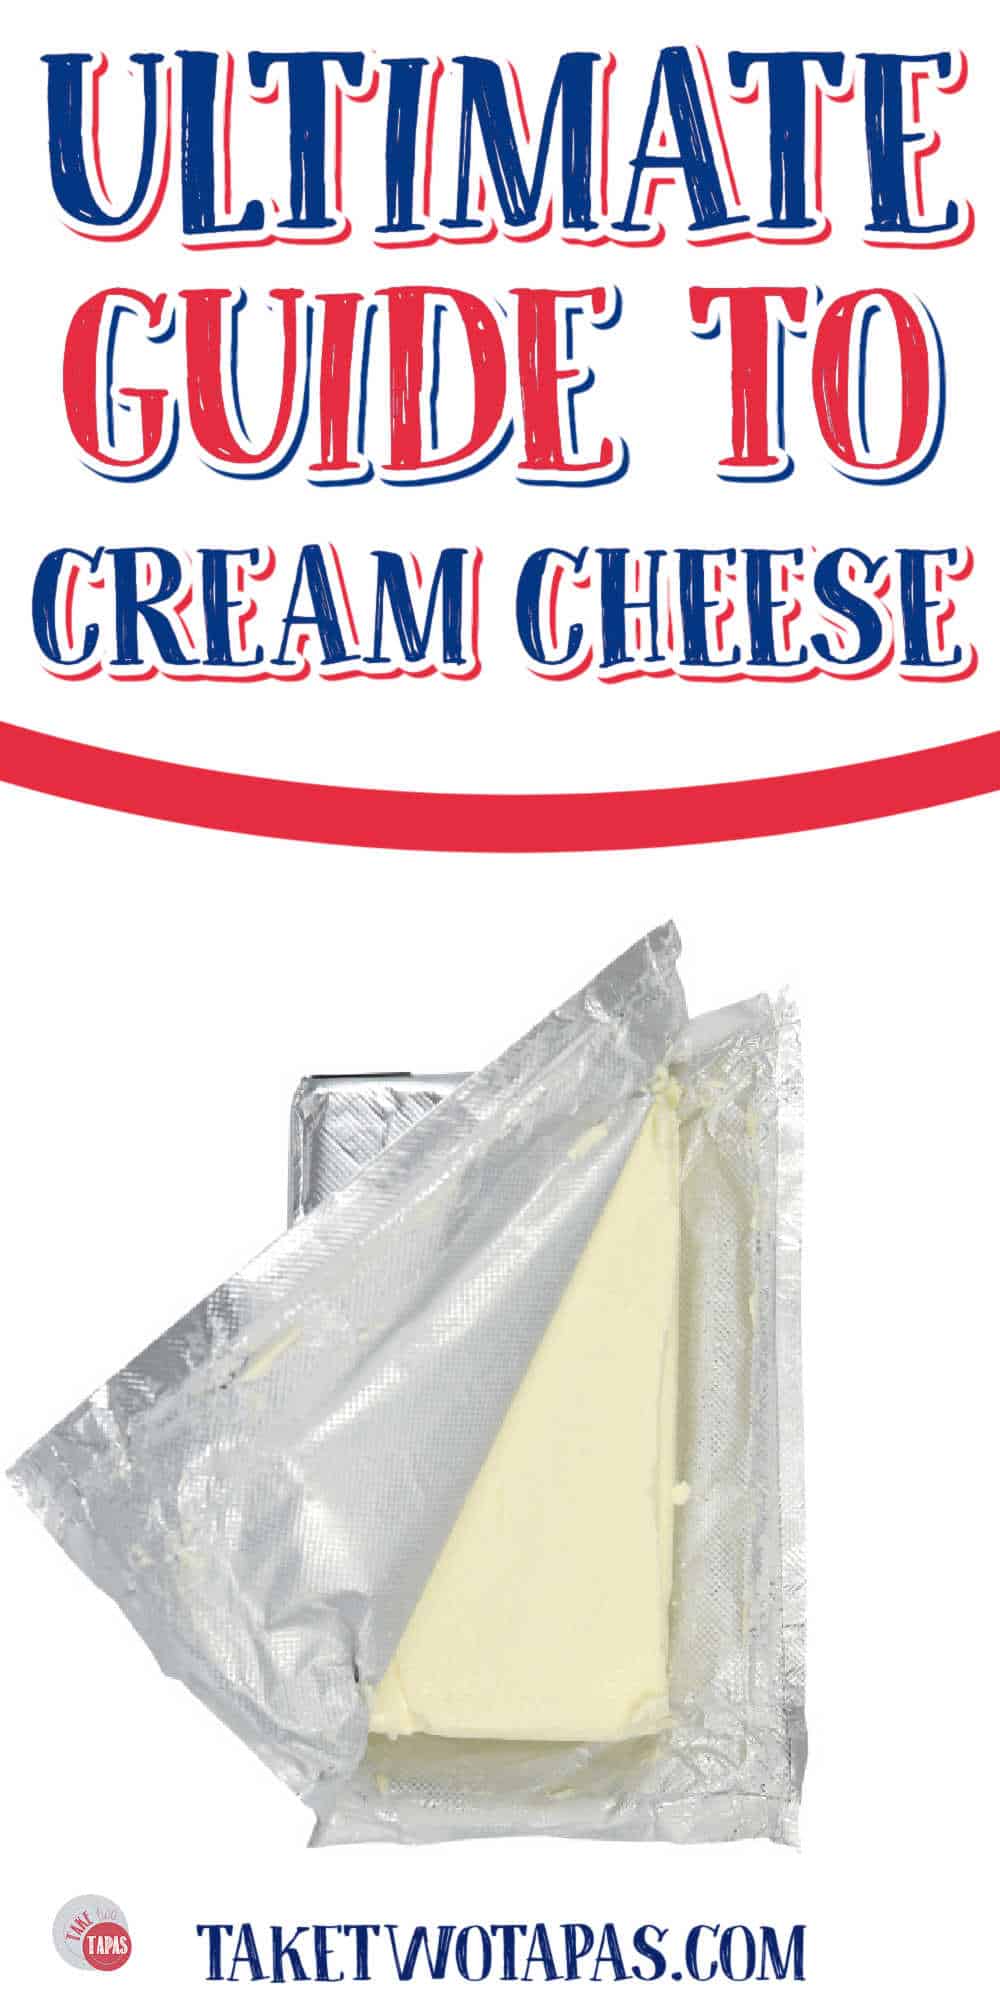 wrapper of cream cheese being partially opened with white banner and yellow text